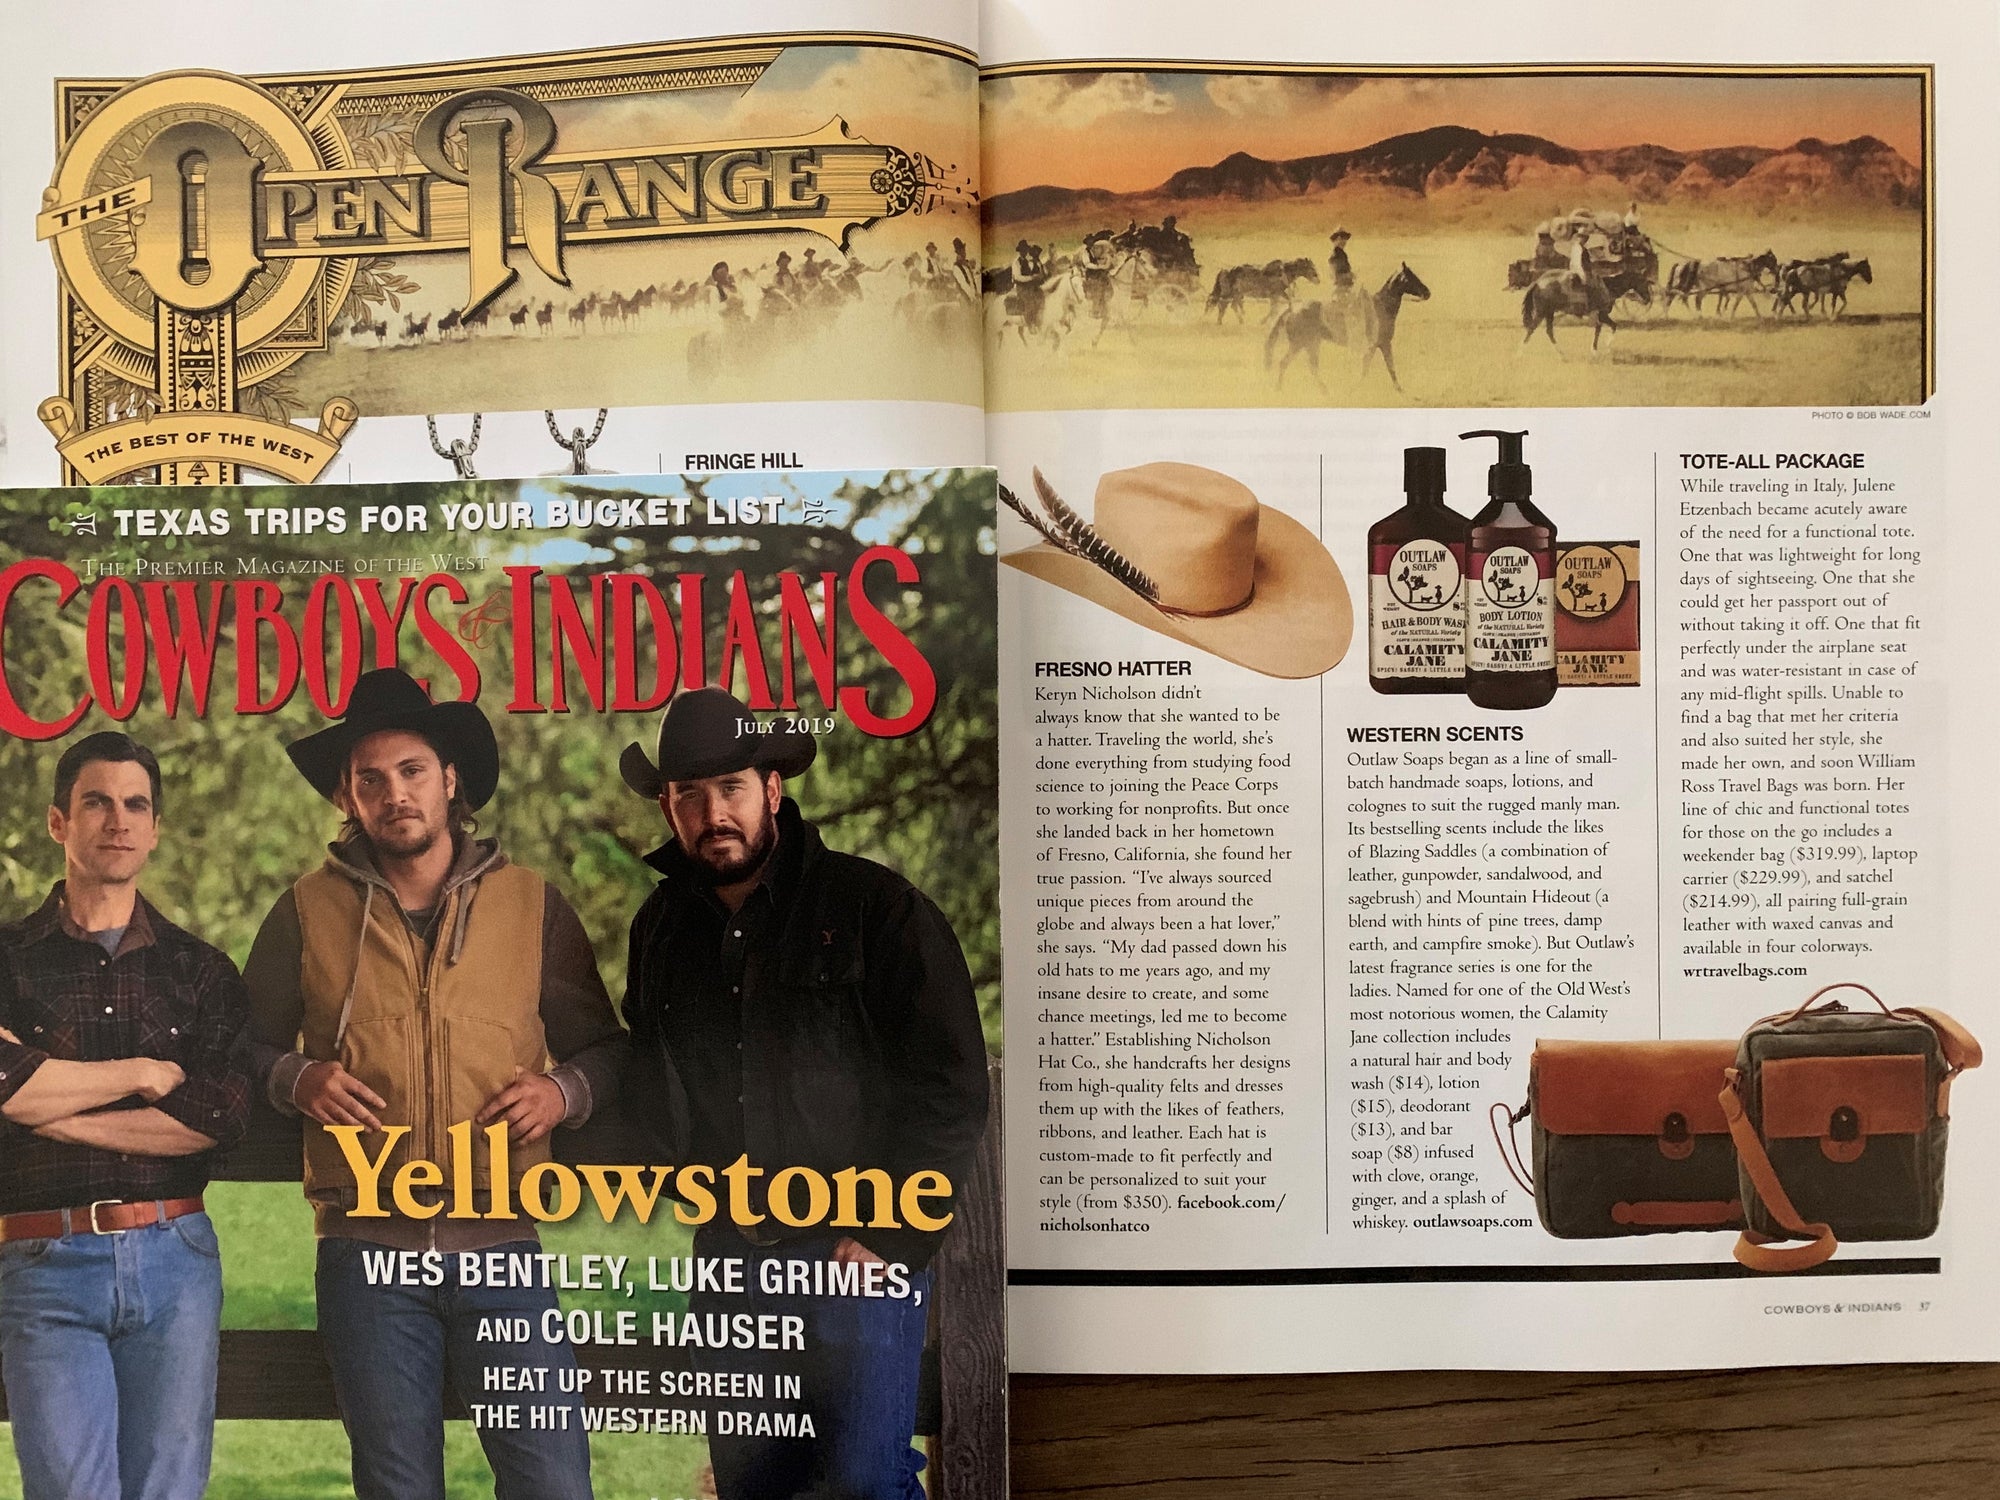 TOTE-ALL PACKAGE:  Cowboys & Indians Magazine The Open Range, edit feature